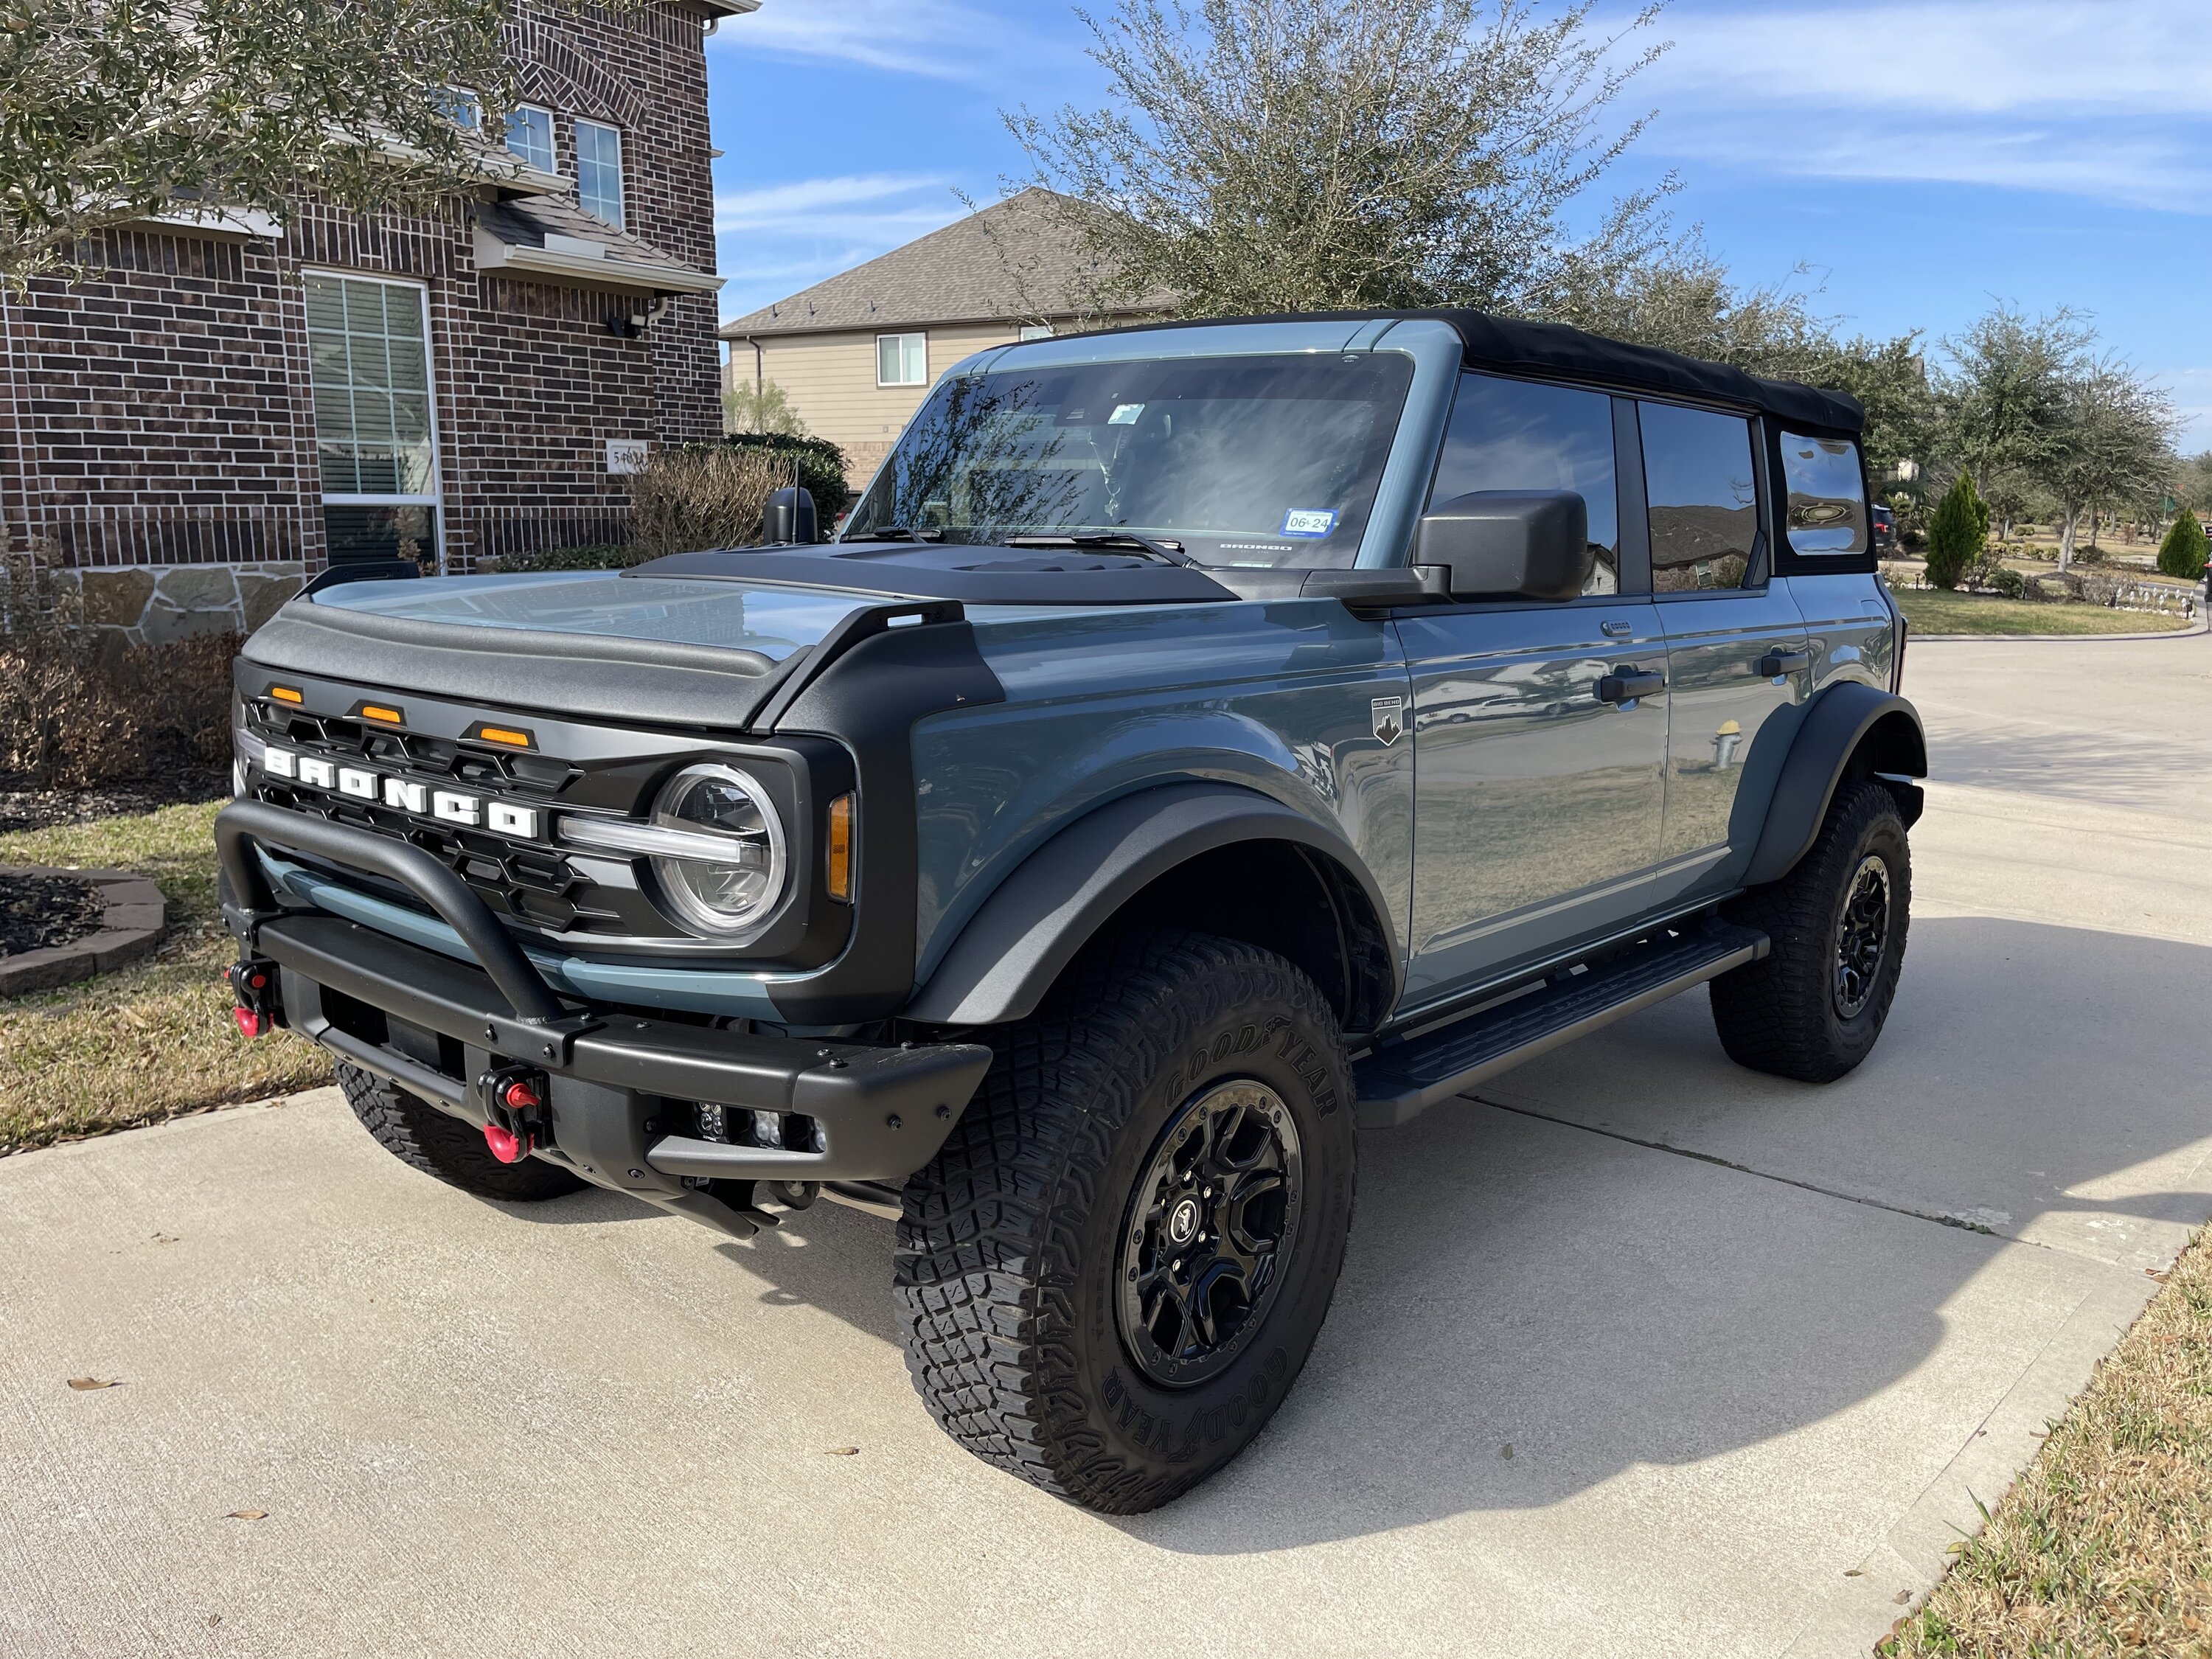 Ford Bronco Then & Now: show your assembly line Bronco and current Bronco picture Bronco Post